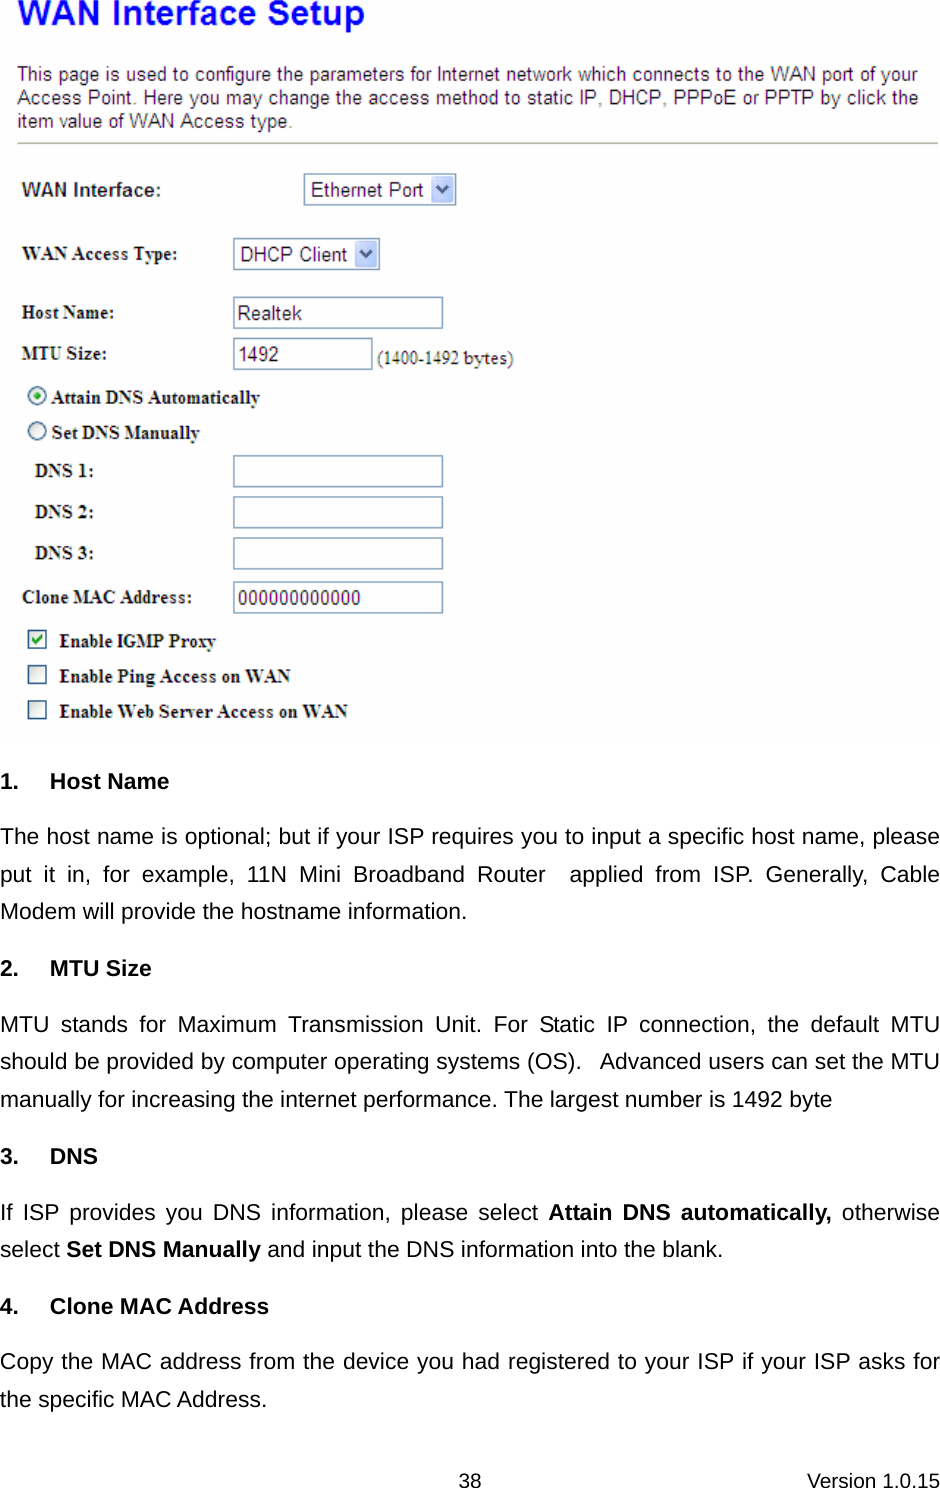 Version 1.0.15 38 1. Host Name The host name is optional; but if your ISP requires you to input a specific host name, please put it in, for example, 11N Mini Broadband Router  applied from ISP. Generally, Cable Modem will provide the hostname information. 2. MTU Size MTU stands for Maximum Transmission Unit. For Static IP connection, the default MTU should be provided by computer operating systems (OS).   Advanced users can set the MTU manually for increasing the internet performance. The largest number is 1492 byte 3. DNS If ISP provides you DNS information, please select Attain DNS automatically, otherwise select Set DNS Manually and input the DNS information into the blank.   4. Clone MAC Address Copy the MAC address from the device you had registered to your ISP if your ISP asks for the specific MAC Address.   